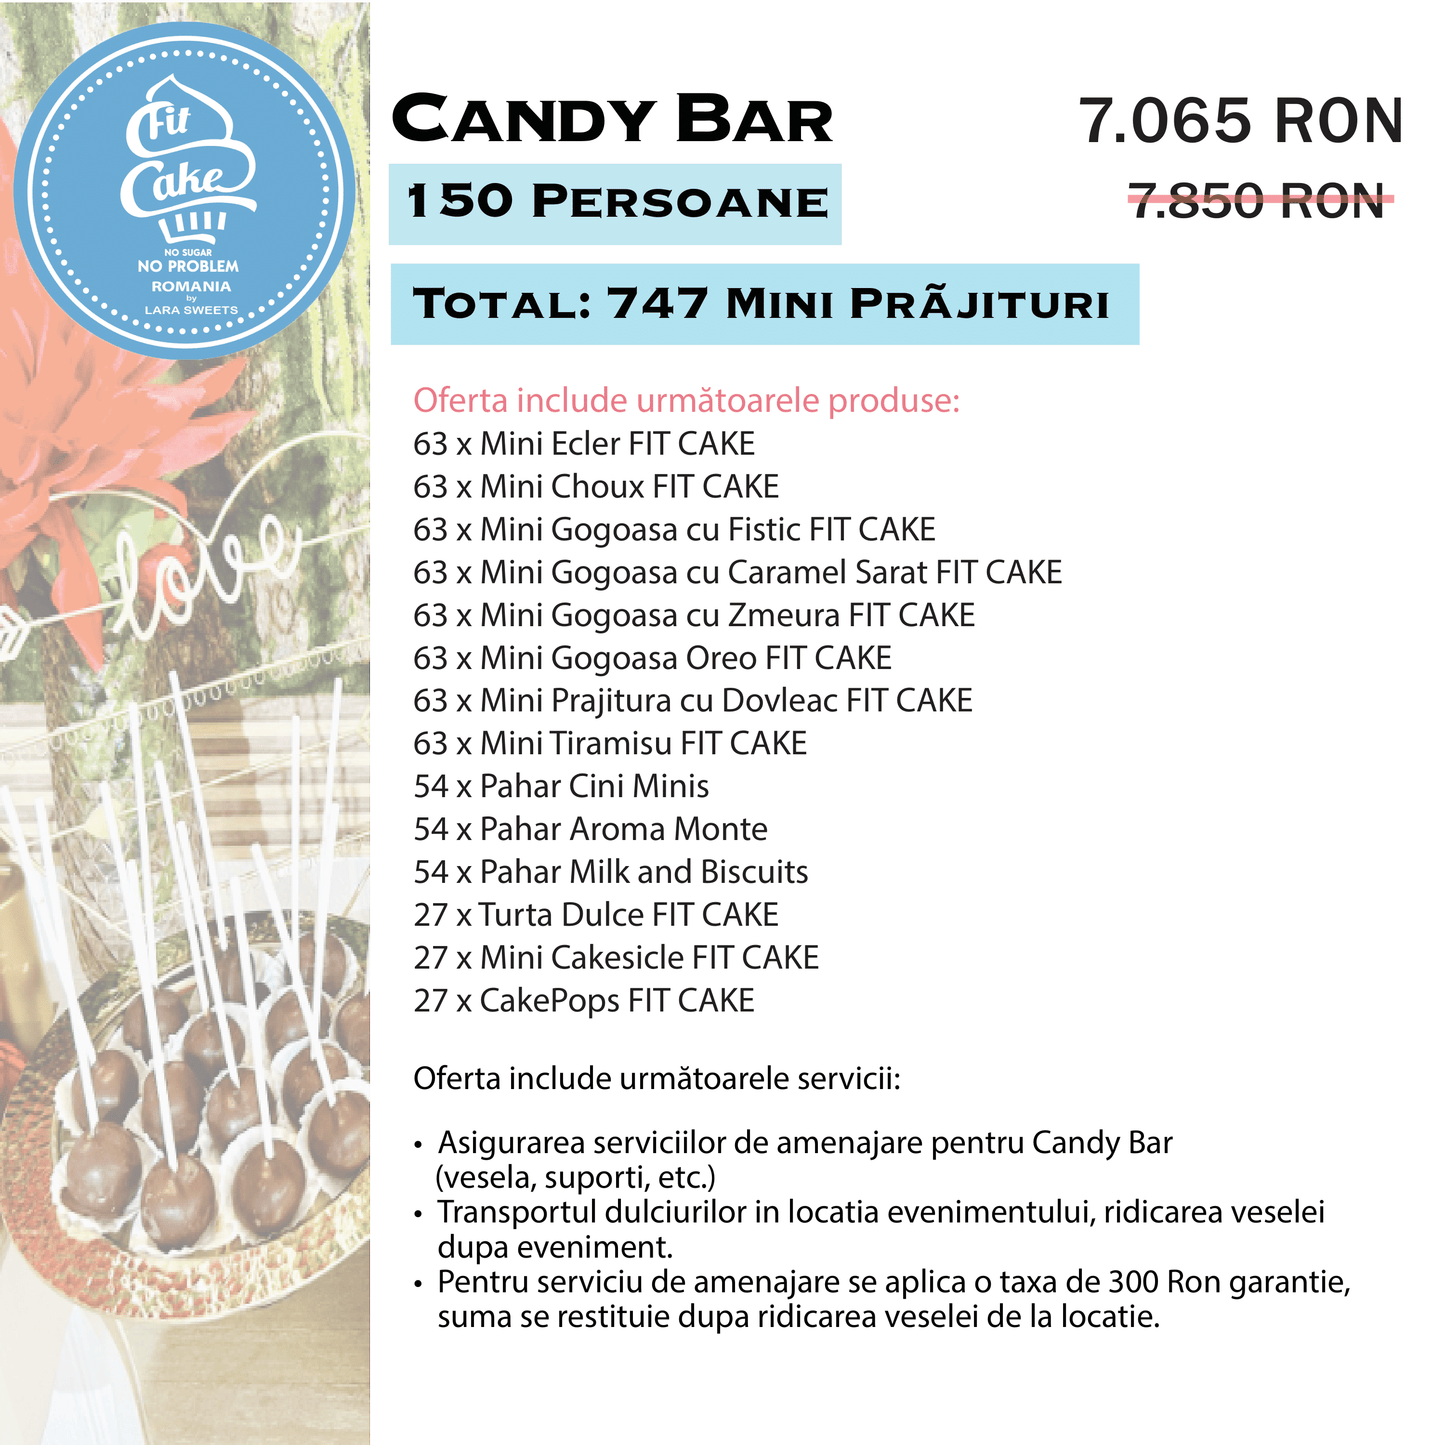 Candy Bar FIT 150 Persoane